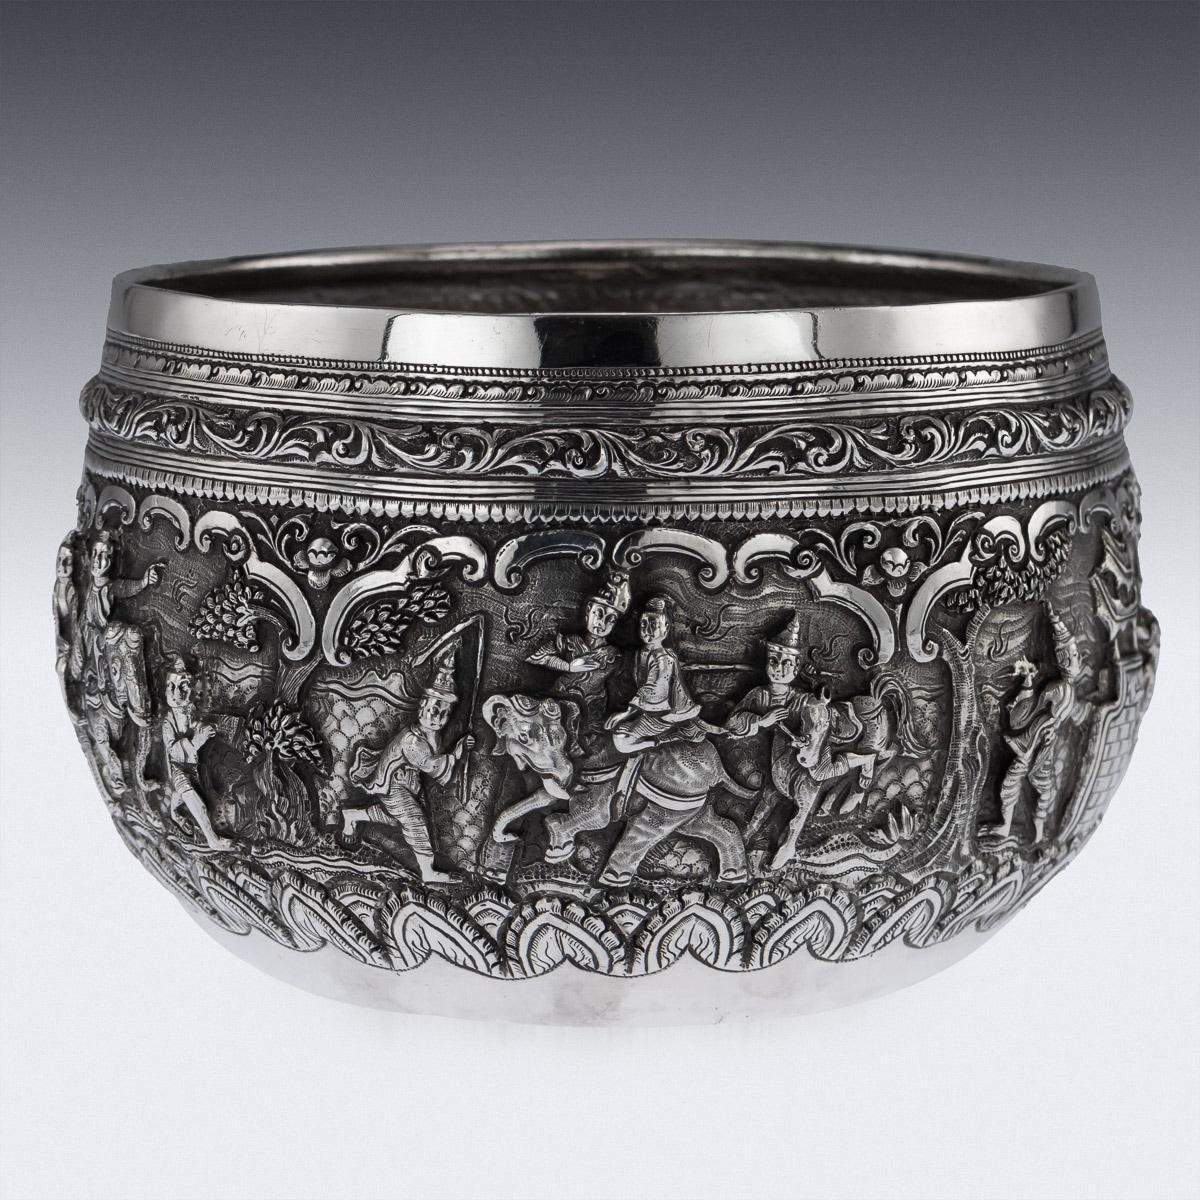 Antique late-19th century Burmese (Myanmar) solid silver thabeik repousse' bowl, very well made and heavy gauge, repousse' decorated in high relief with six different scenes from the Burmese mythology, representing various figures and animals in a